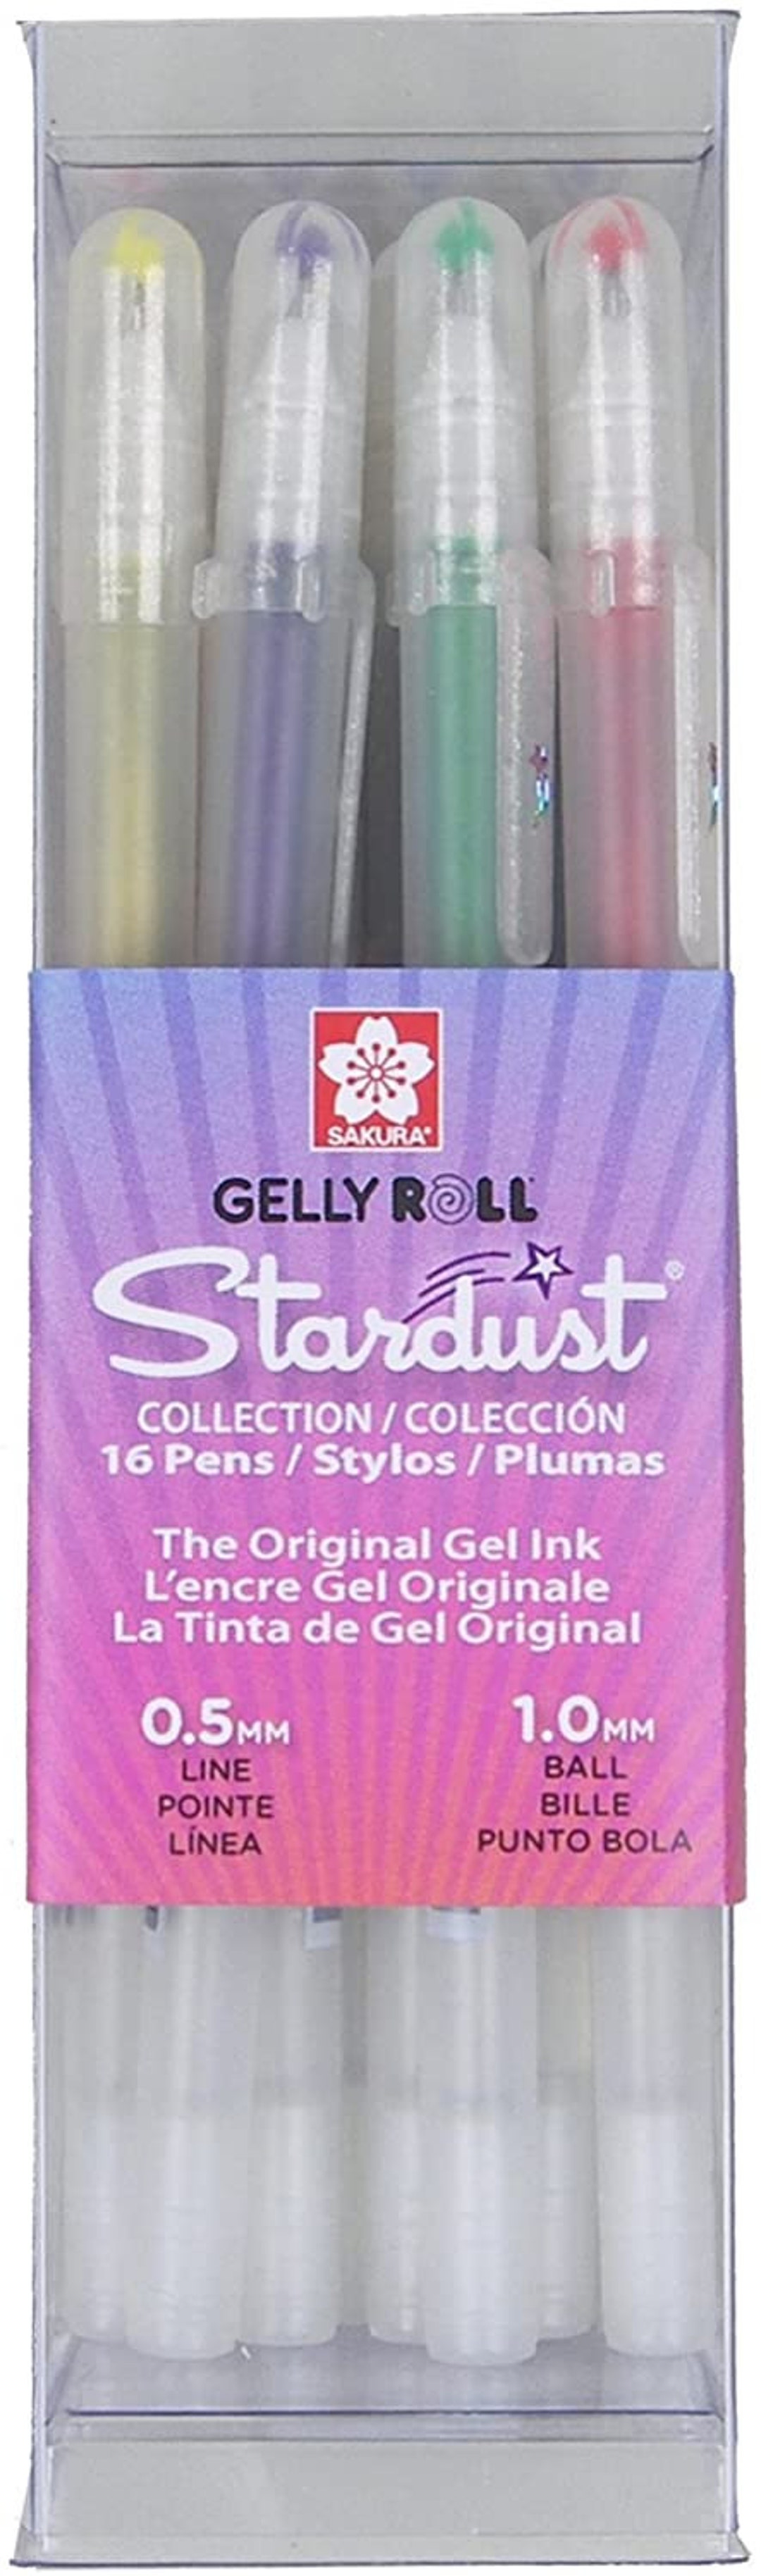 SAKURA Gelly Roll Gel Pens - Fine Point Ink Pen for Journaling, Art, or  Drawing - Classic White Ink - Assorted Point Sizes - 6 Pack